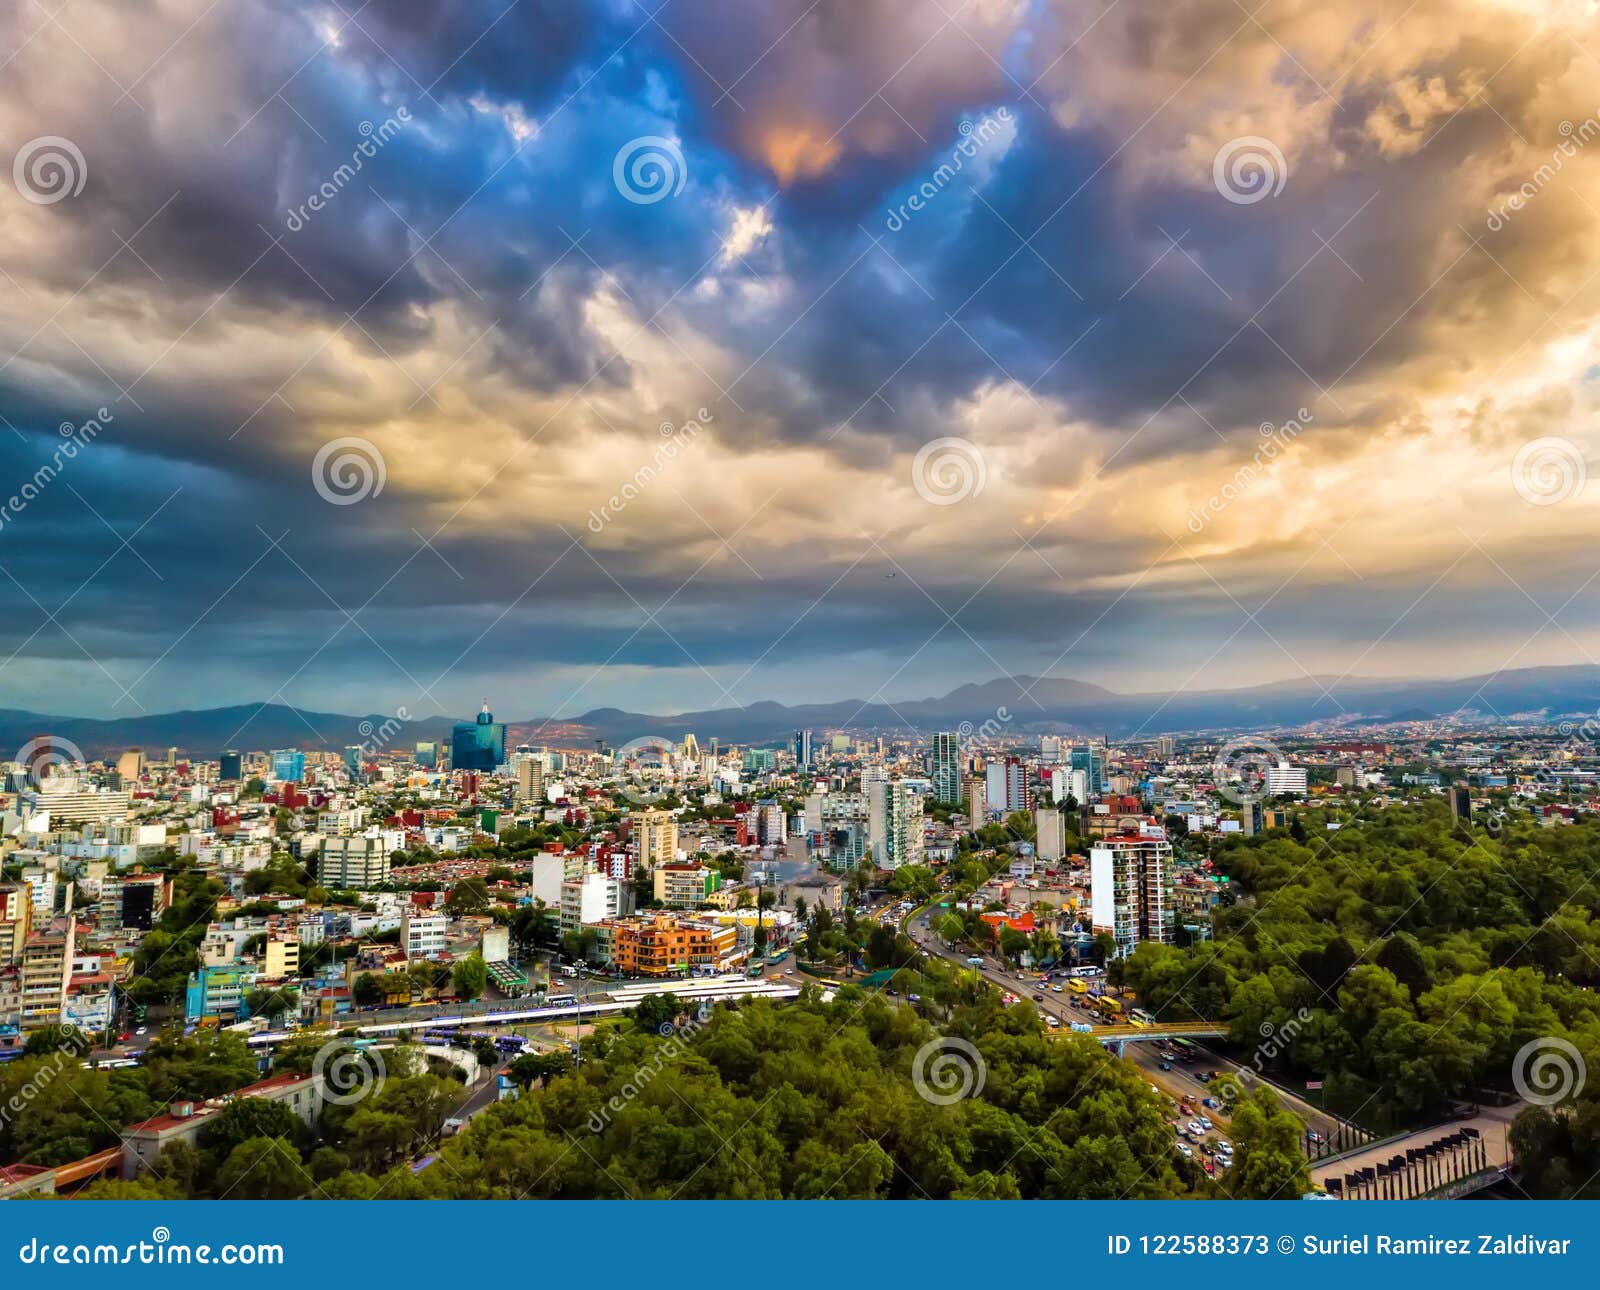 mexico city - aerial panoramic view - sunset